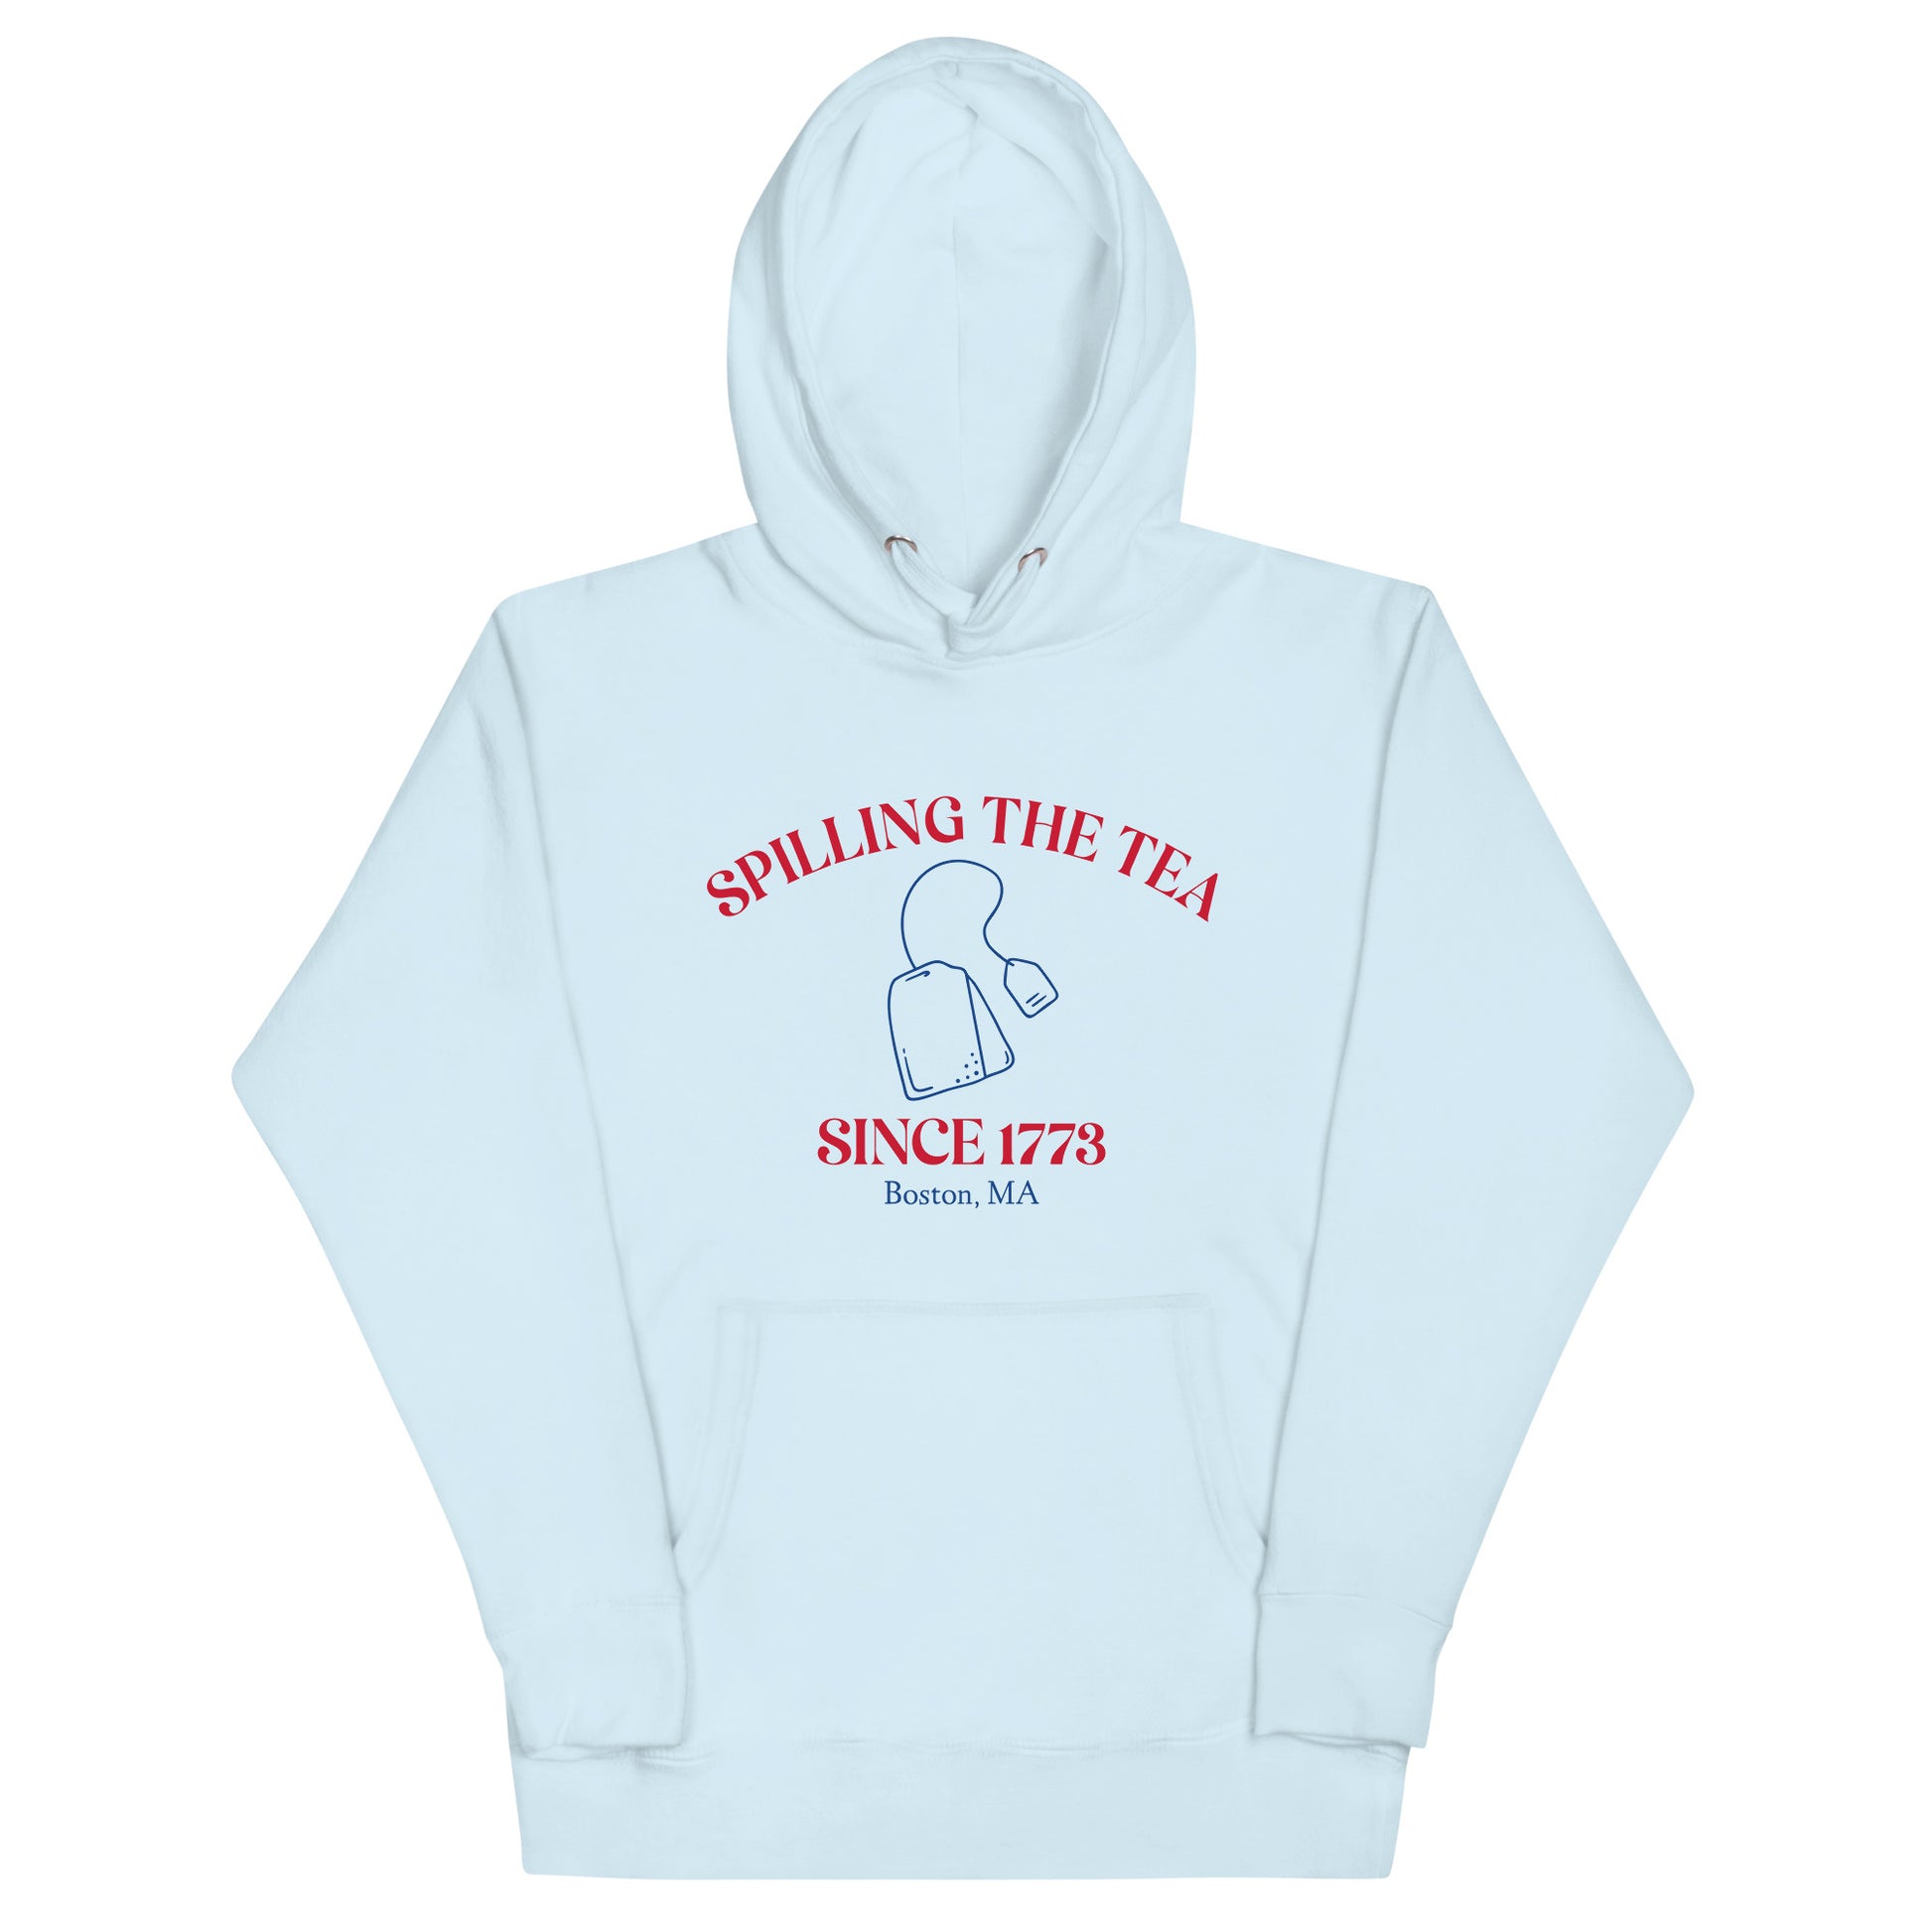 blue hoodie that say "spilling the tea since 1773" in red lettering and "Boston MA" in blue lettering with tea bag graphic in middle